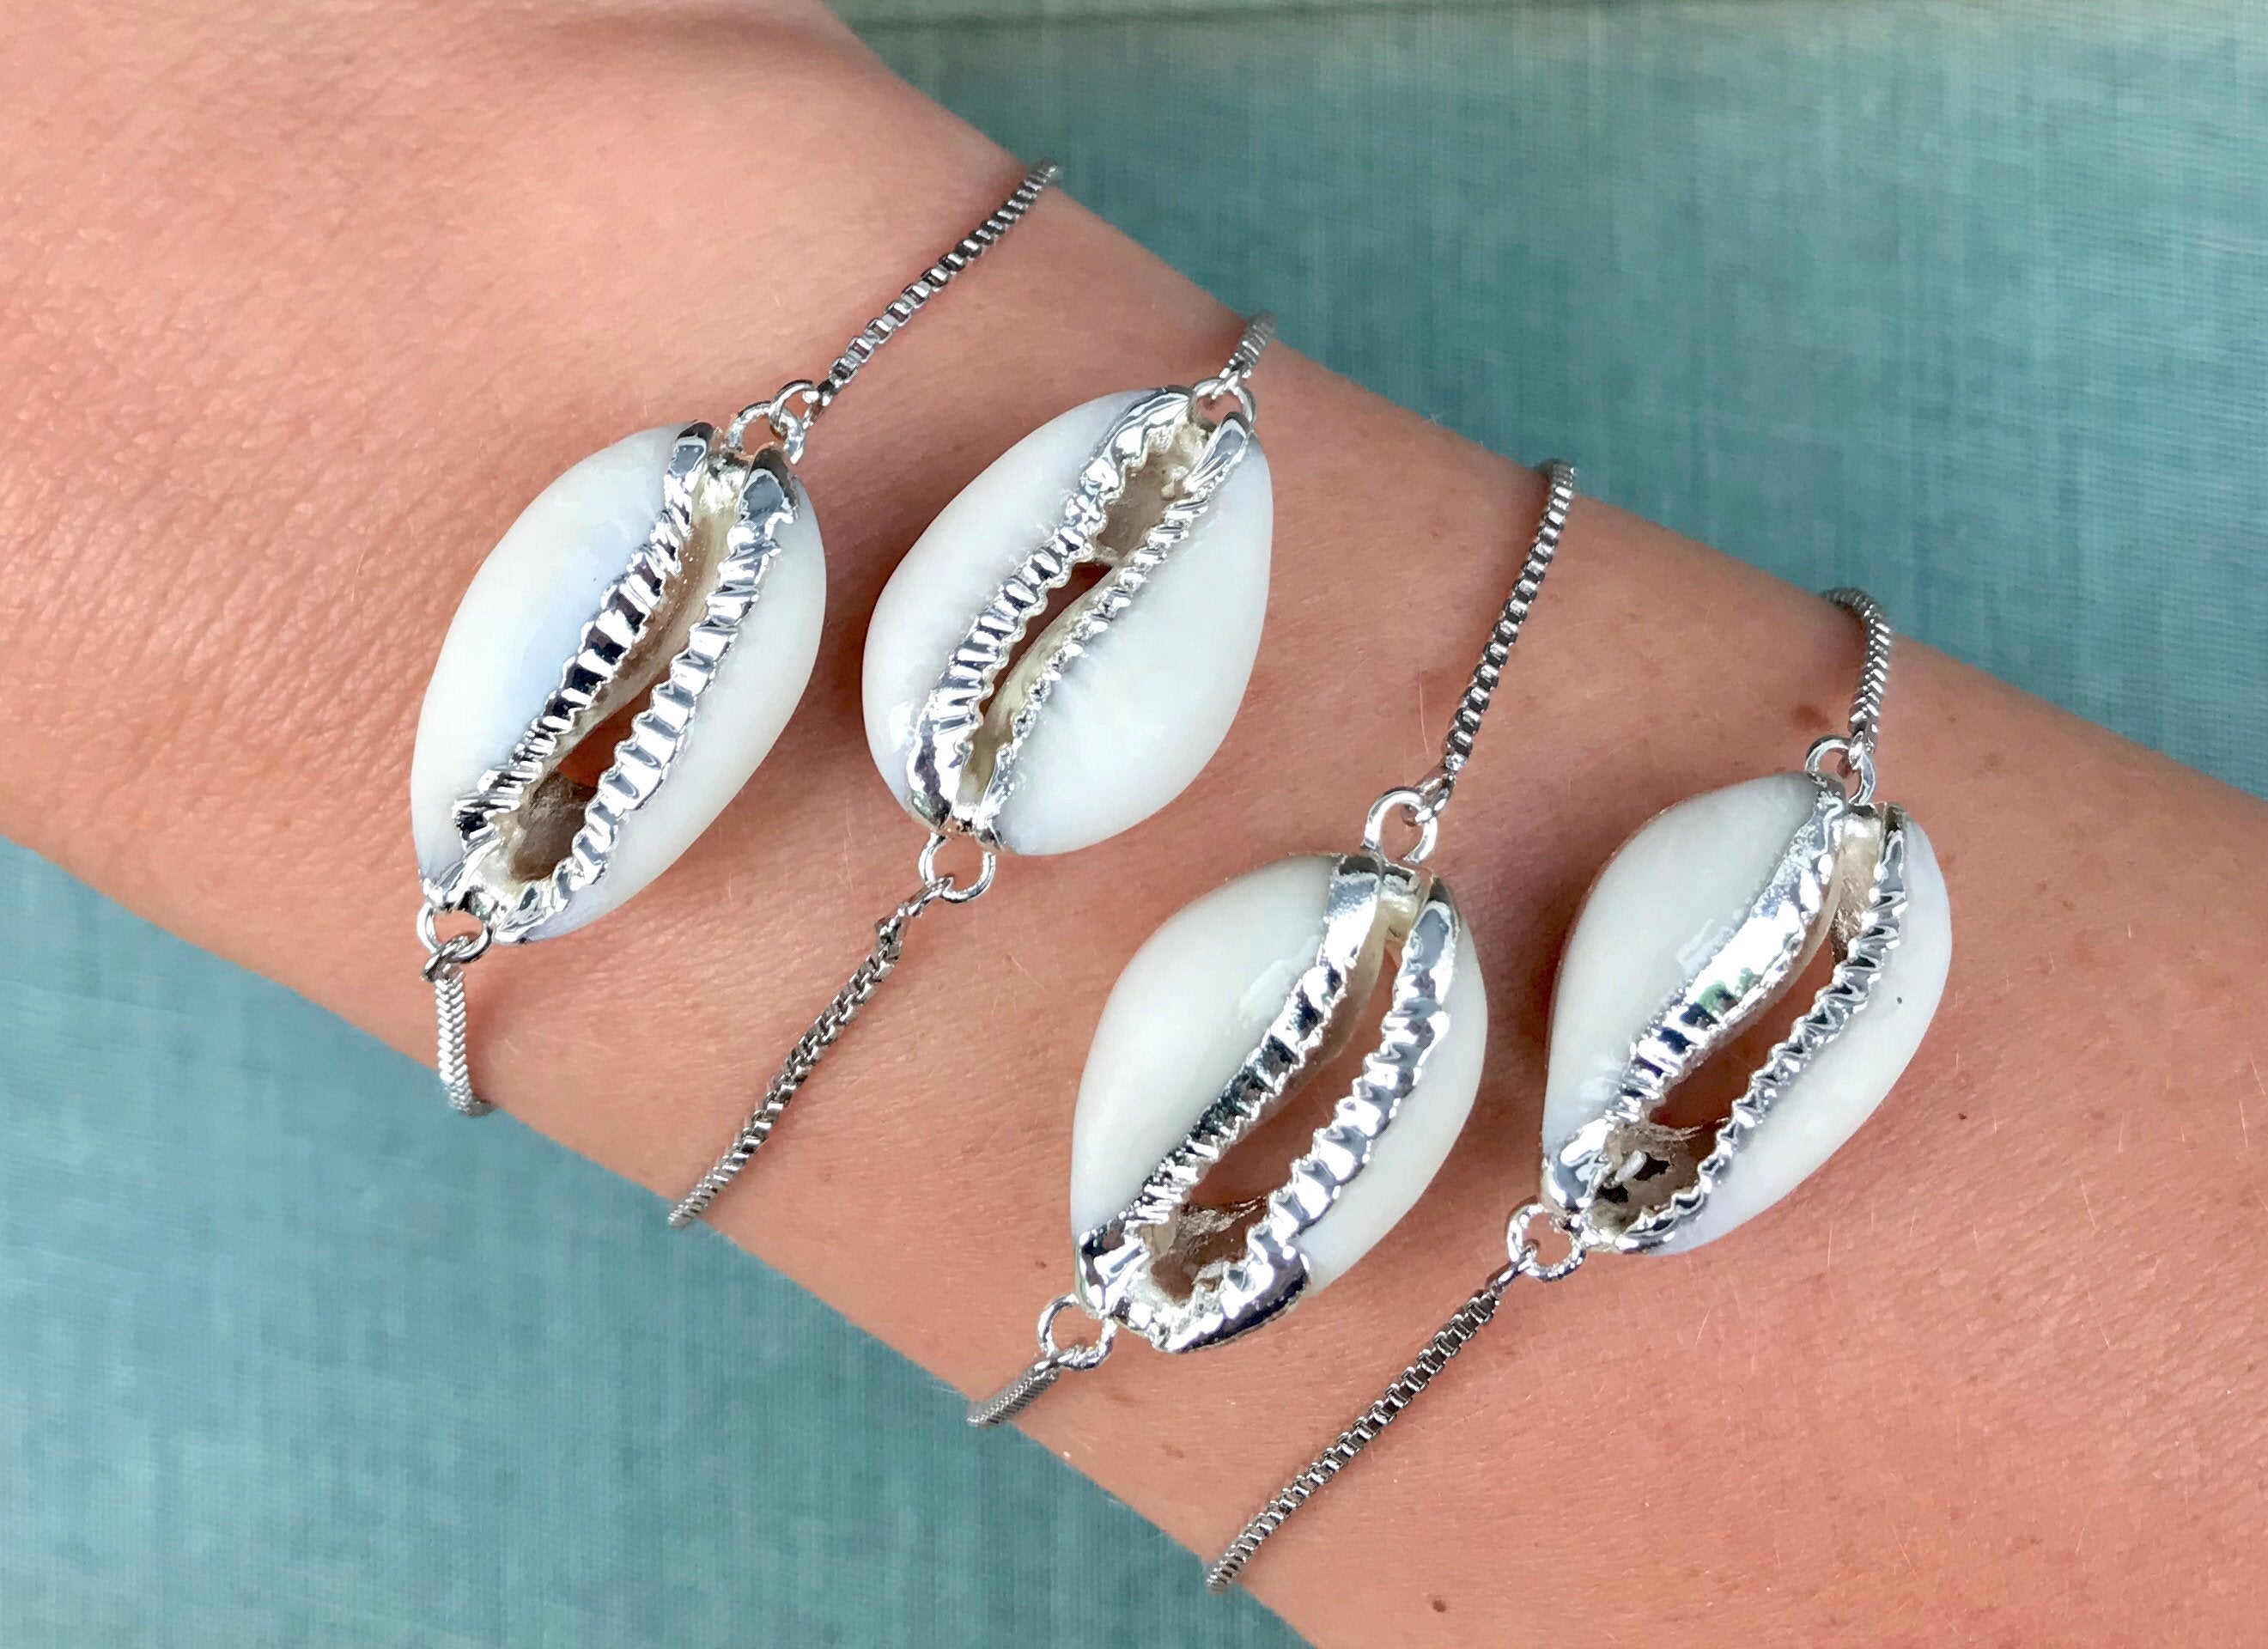 Cowrie Shell Anklet, Sea Shell Anklet, Seashell Anklet, Hawaiian Bracelets,  Cowrie Shell Jewelry, Cowry Shell Anklet, Hawaiian Anklet - Etsy | Cowrie  shell jewelry, Anklets diy, Seashell jewelry diy